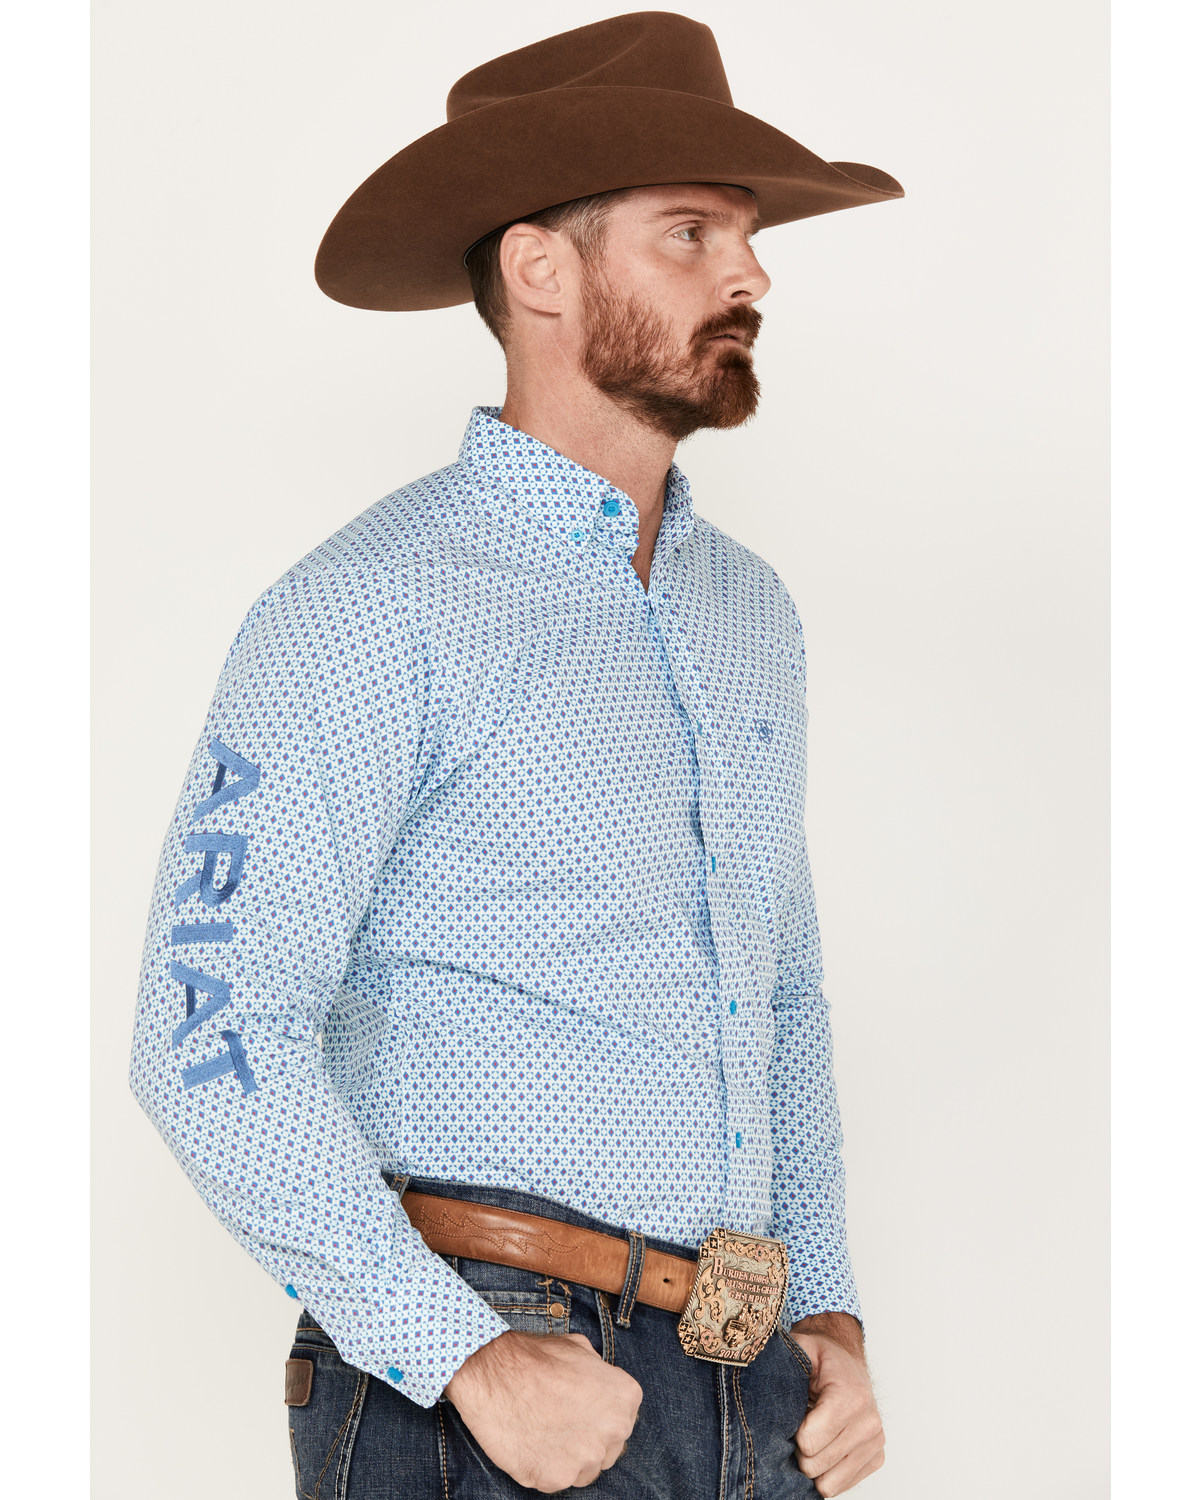 Ariat Men's Team Syed Fitted Shirt